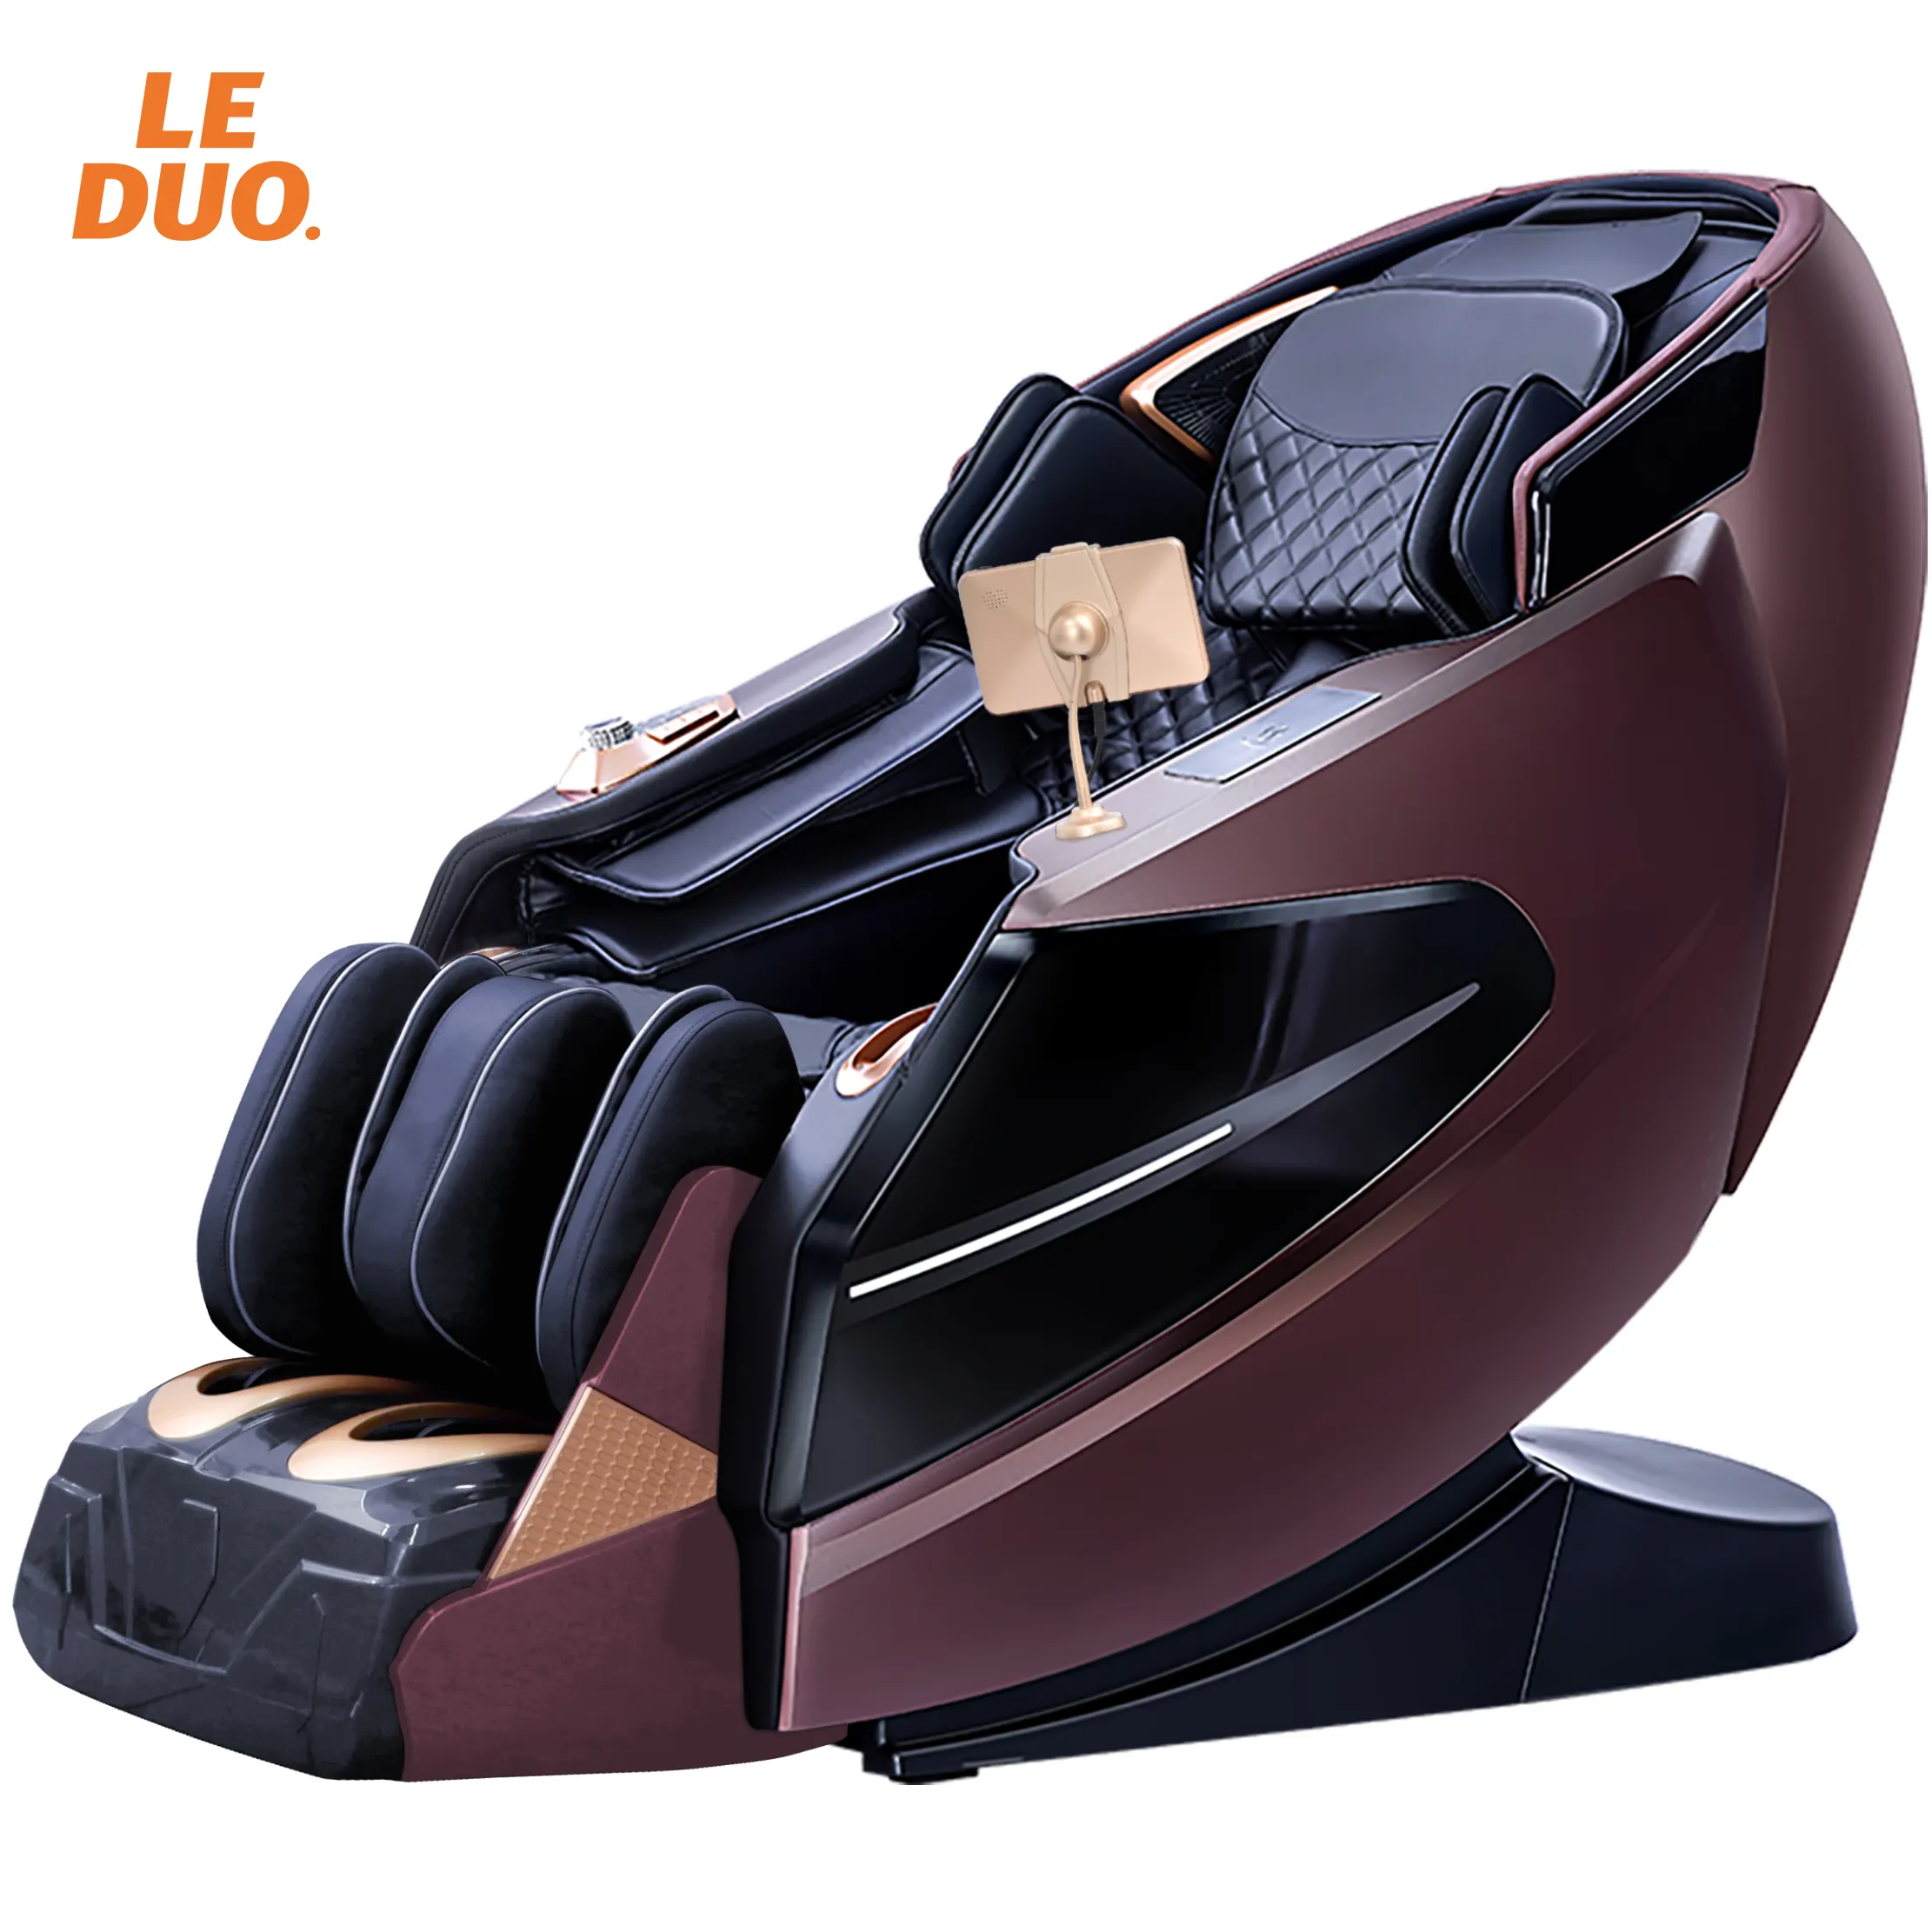 Best Seller vending Massage Products Chair Massage sofa coin message 4D Sl Track Full Body Electric Zero Gravity Massage Chair